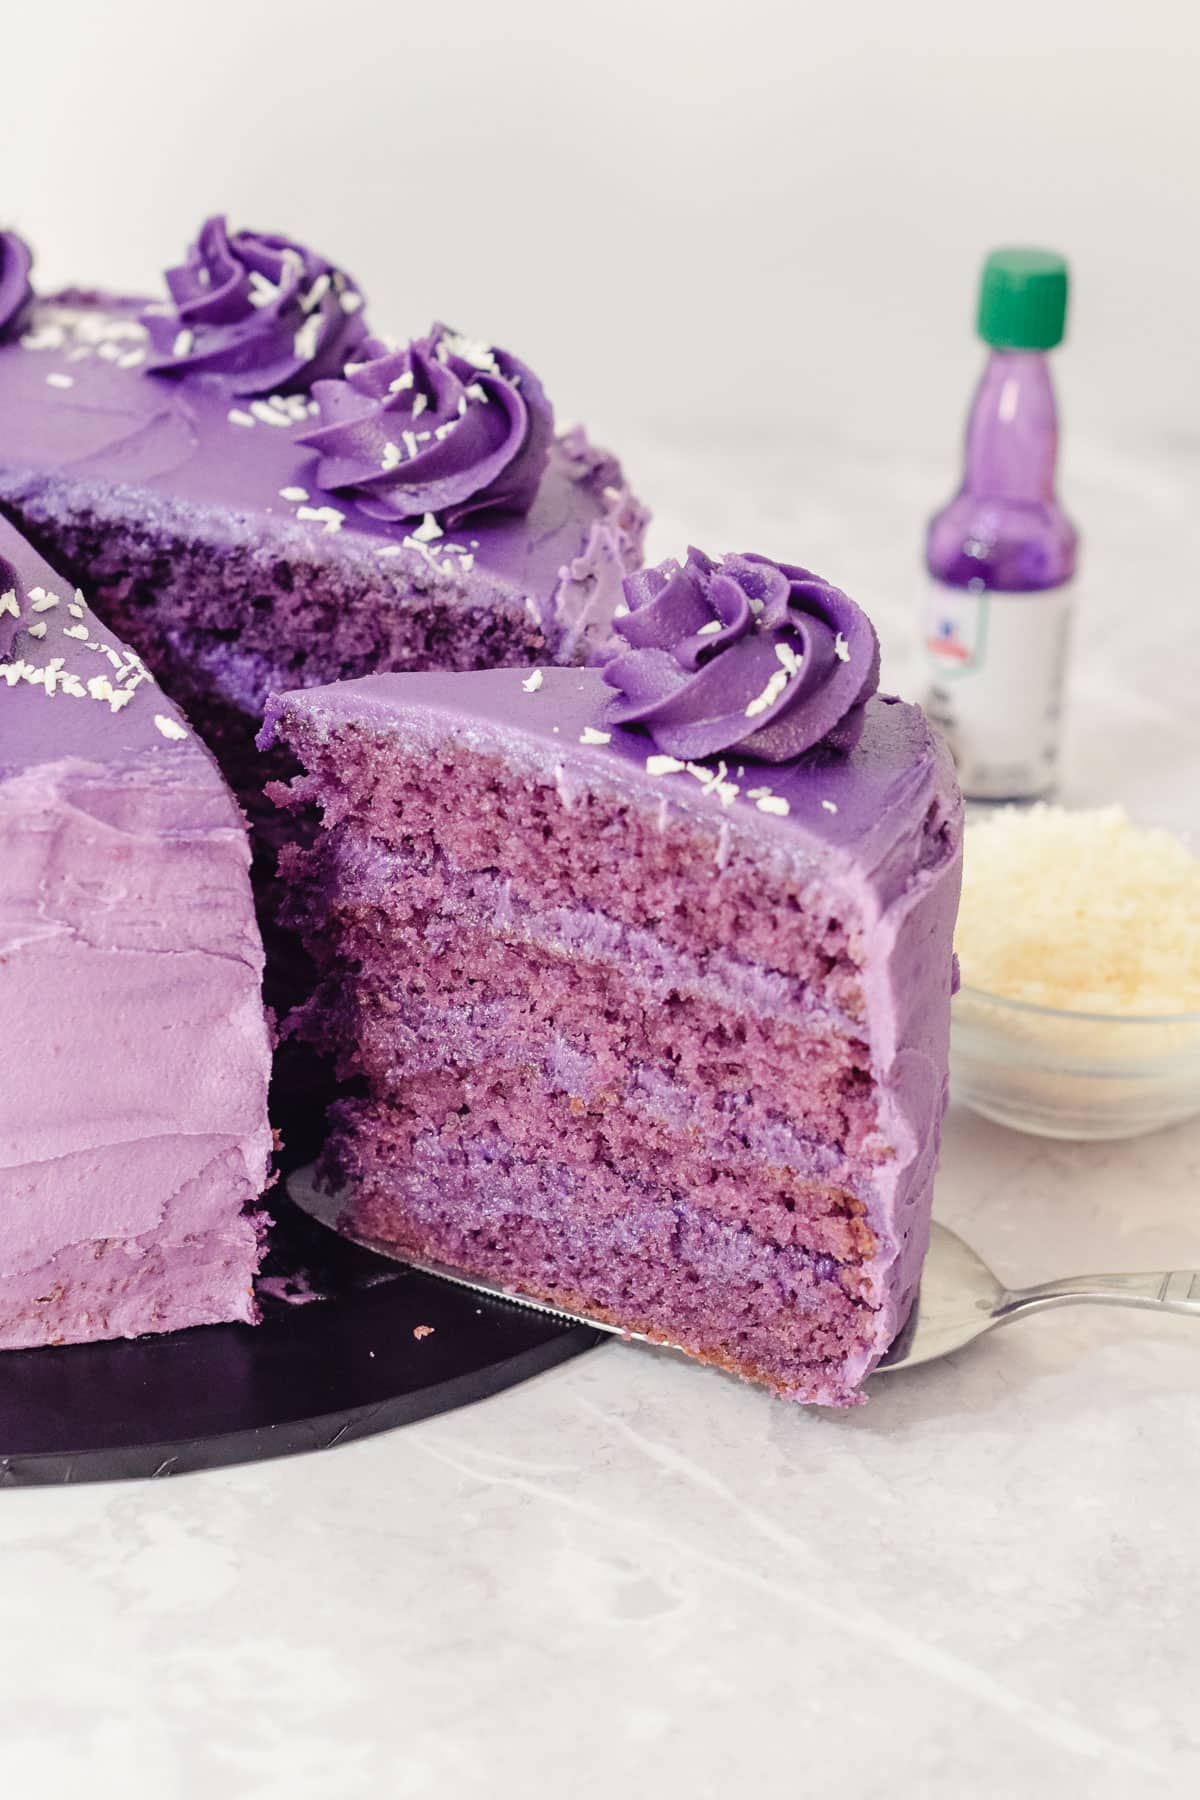 purple yam ube cake with four layers of ube sponge and an ube frosting and filling.